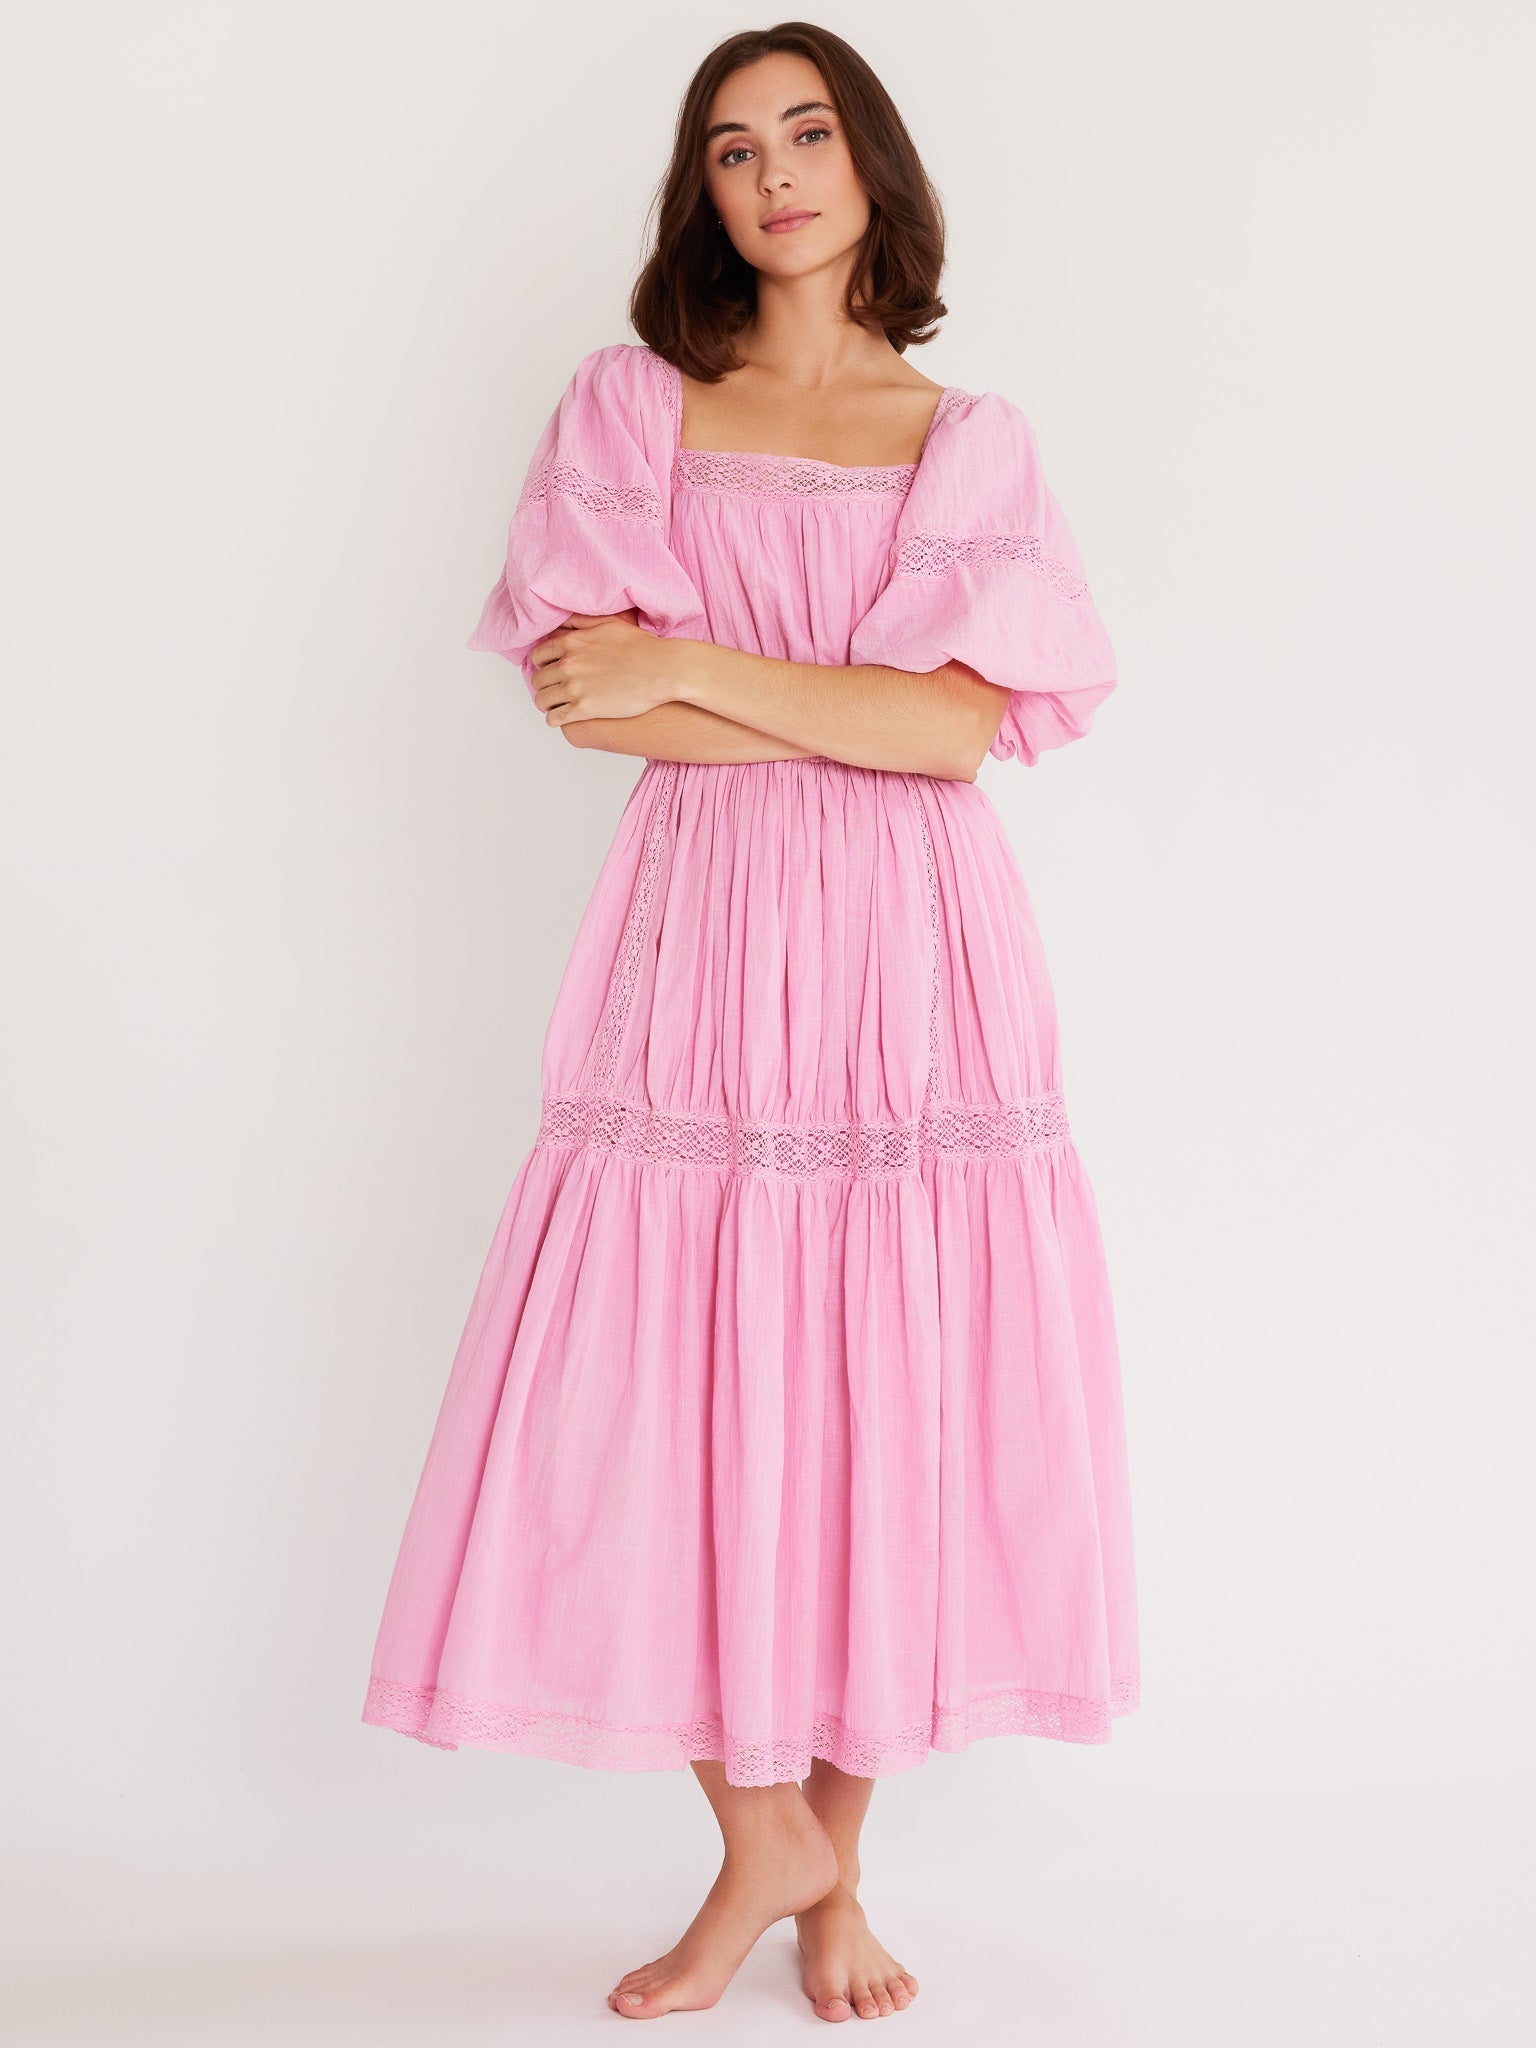 MILLE Clothing Talitha Dress in Bubblegum